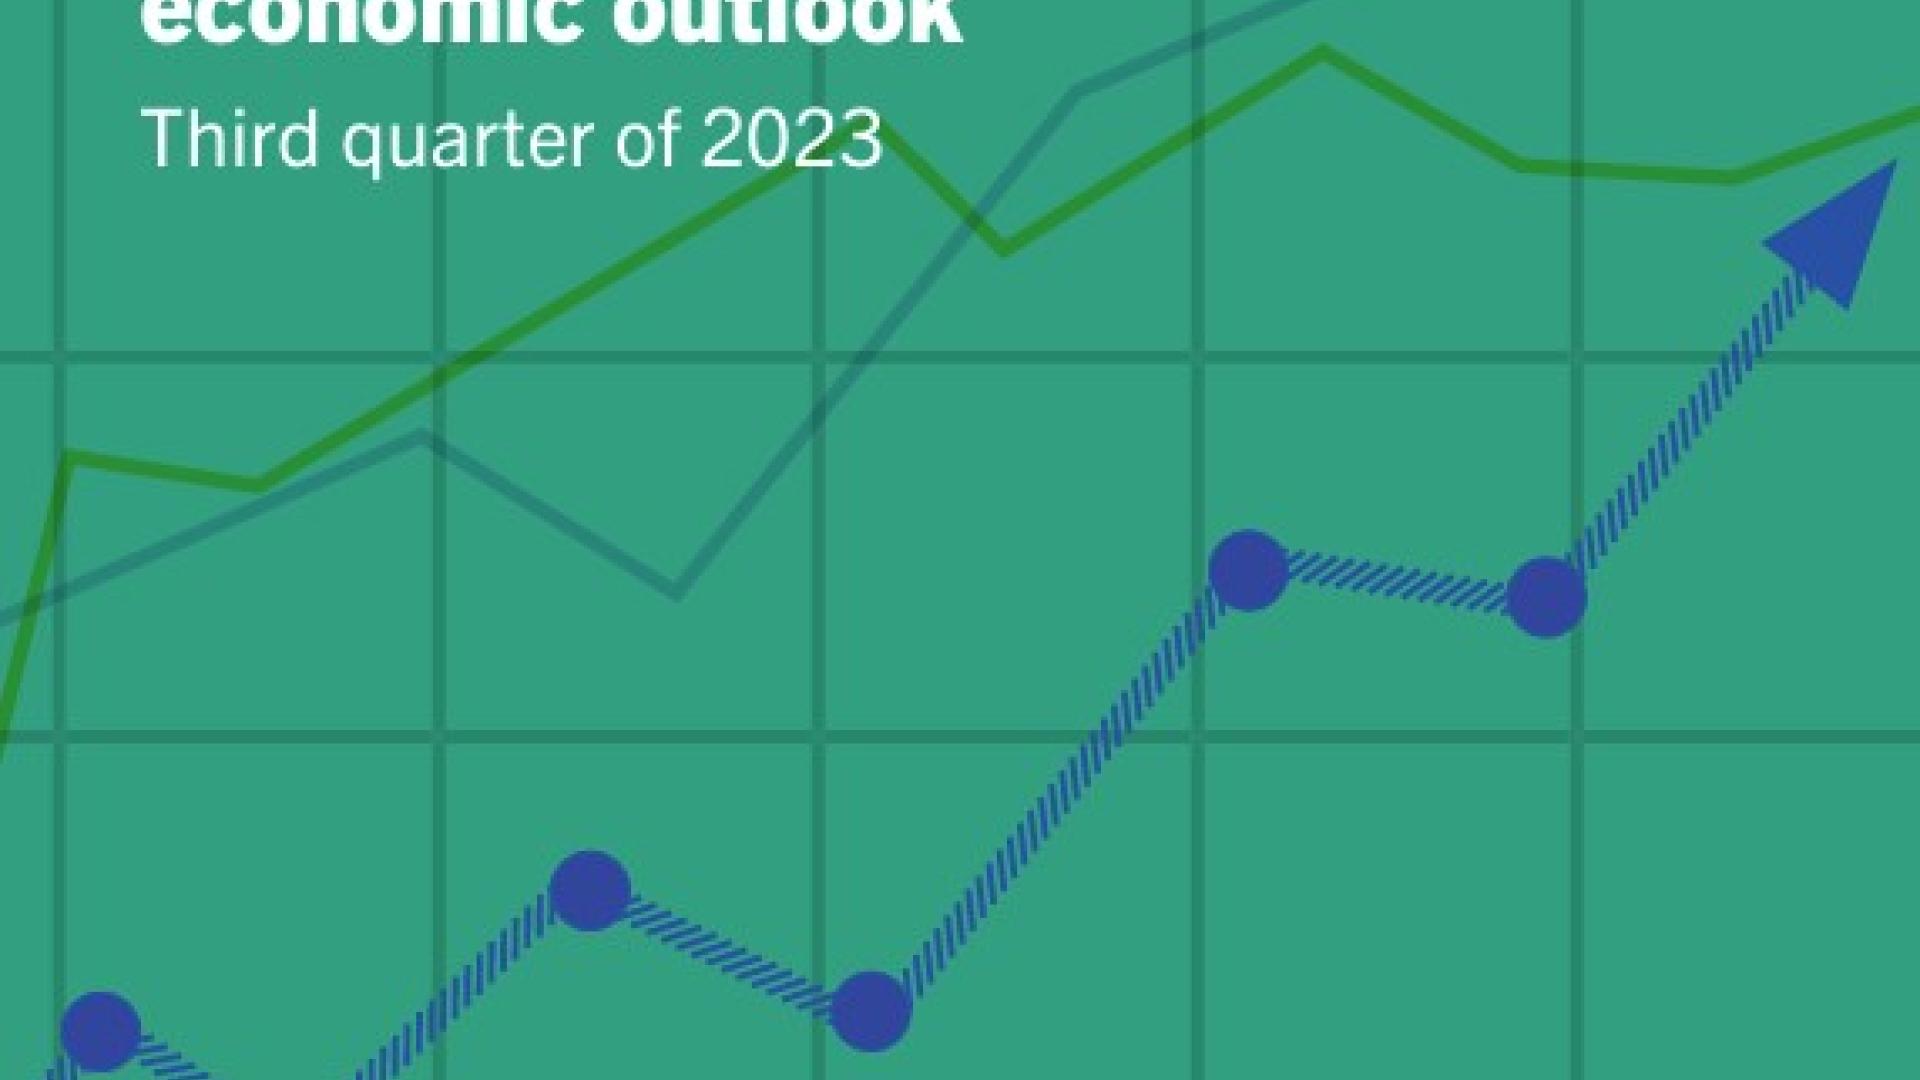 US Outlook 2023